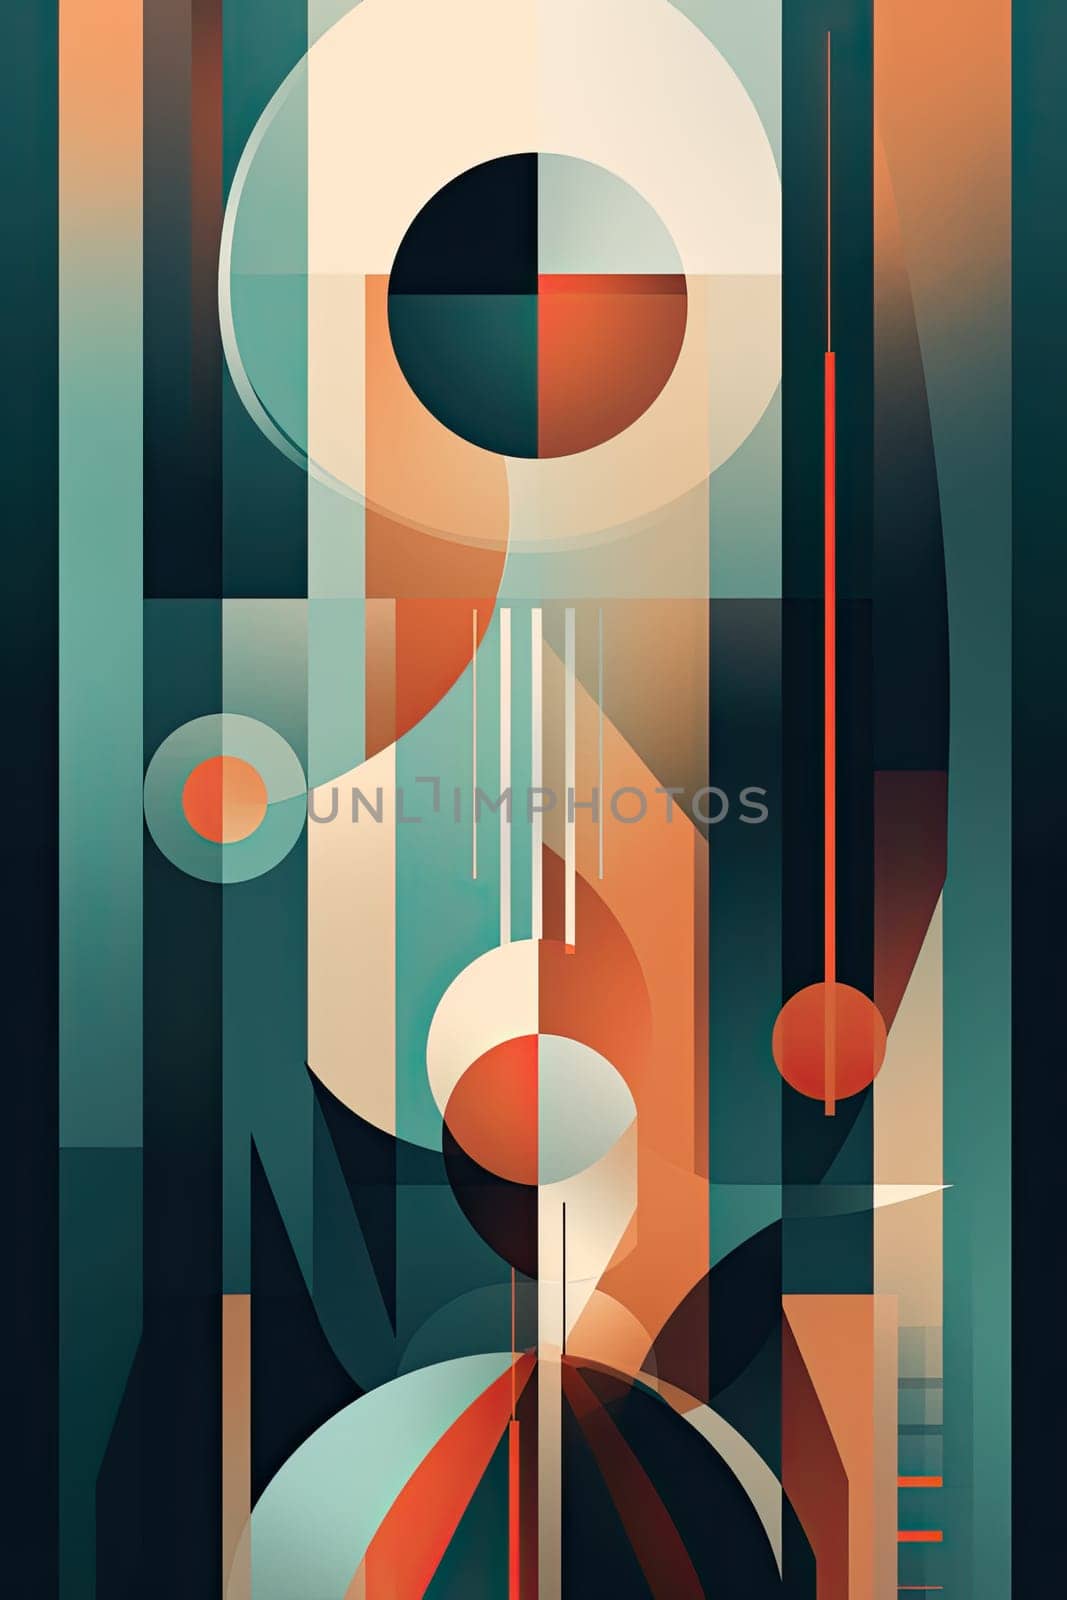 A captivating abstract composition with bold and vibrant shapes merging together.